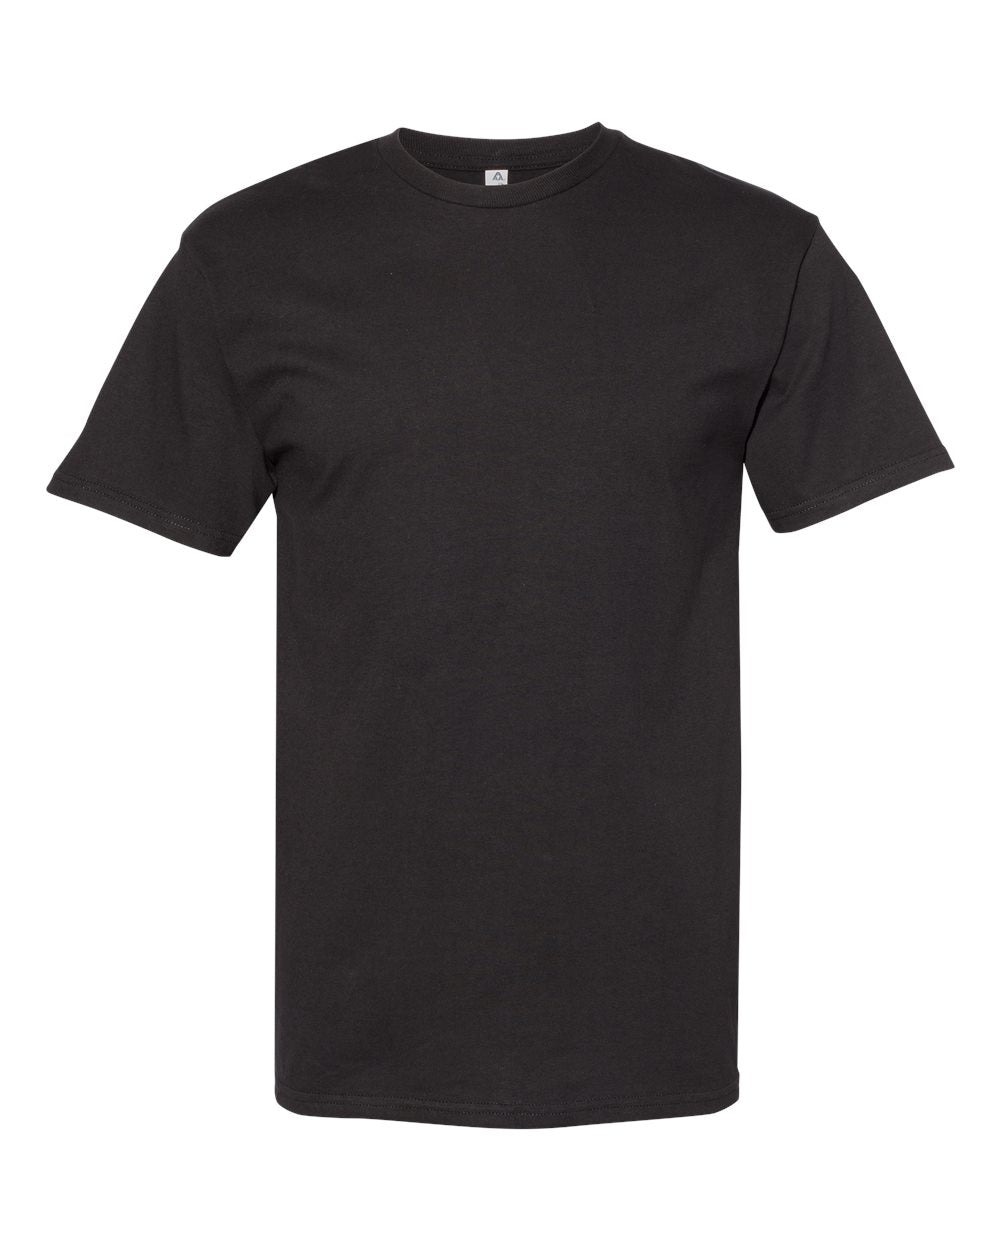 American Apparel Midweight Cotton Unisex Tee 1701 #color_Black